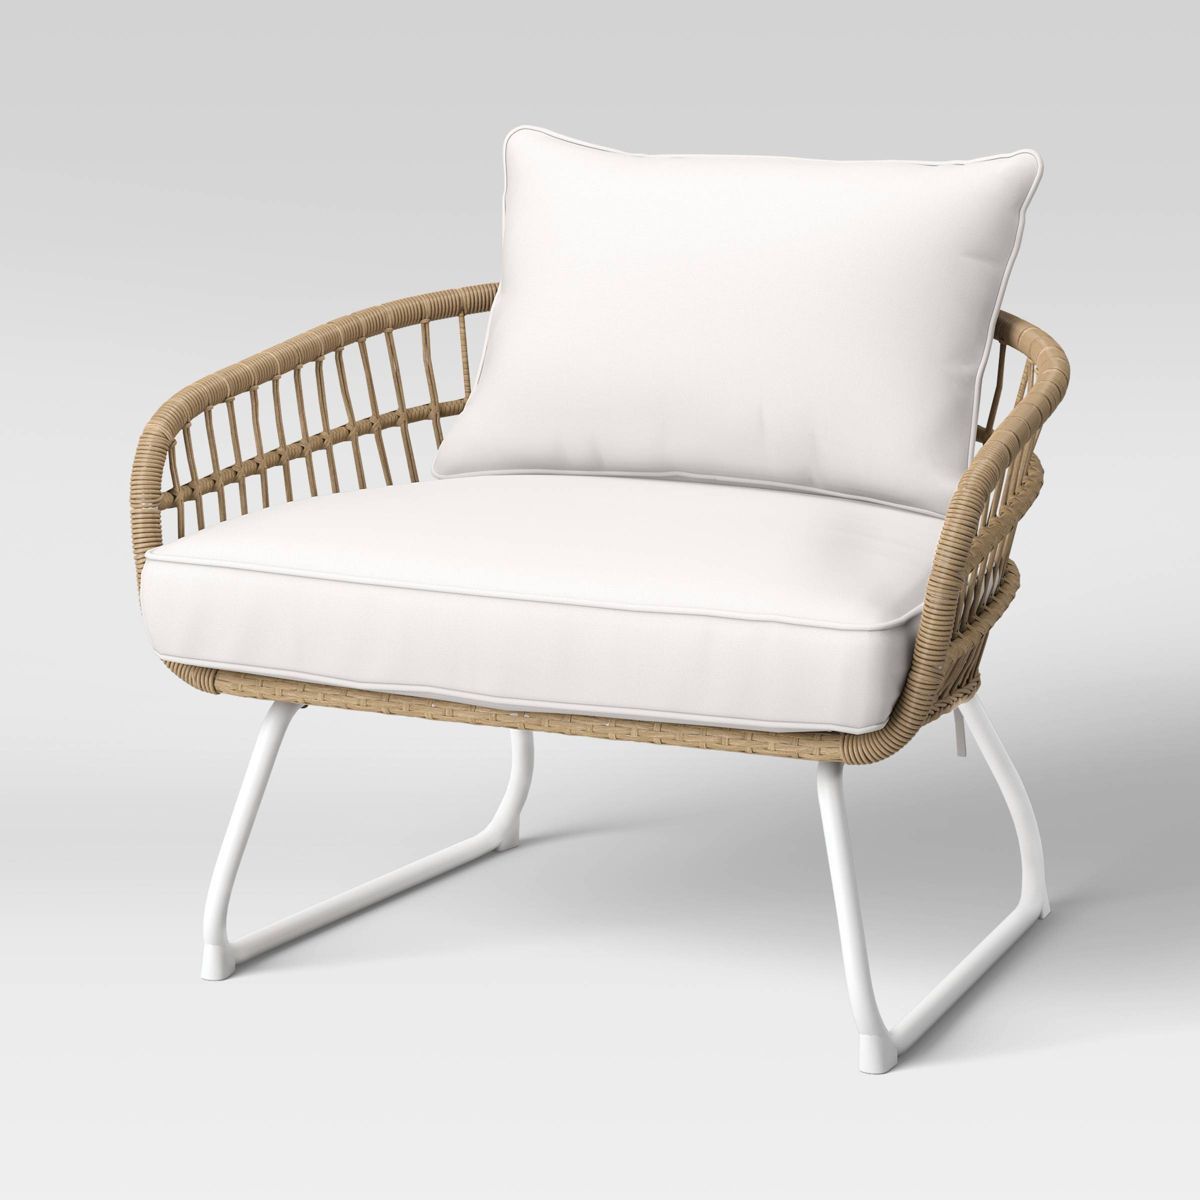 Southport Outdoor Patio Chair with Metal Legs, Club Chair Natural/White - Threshold™ | Target